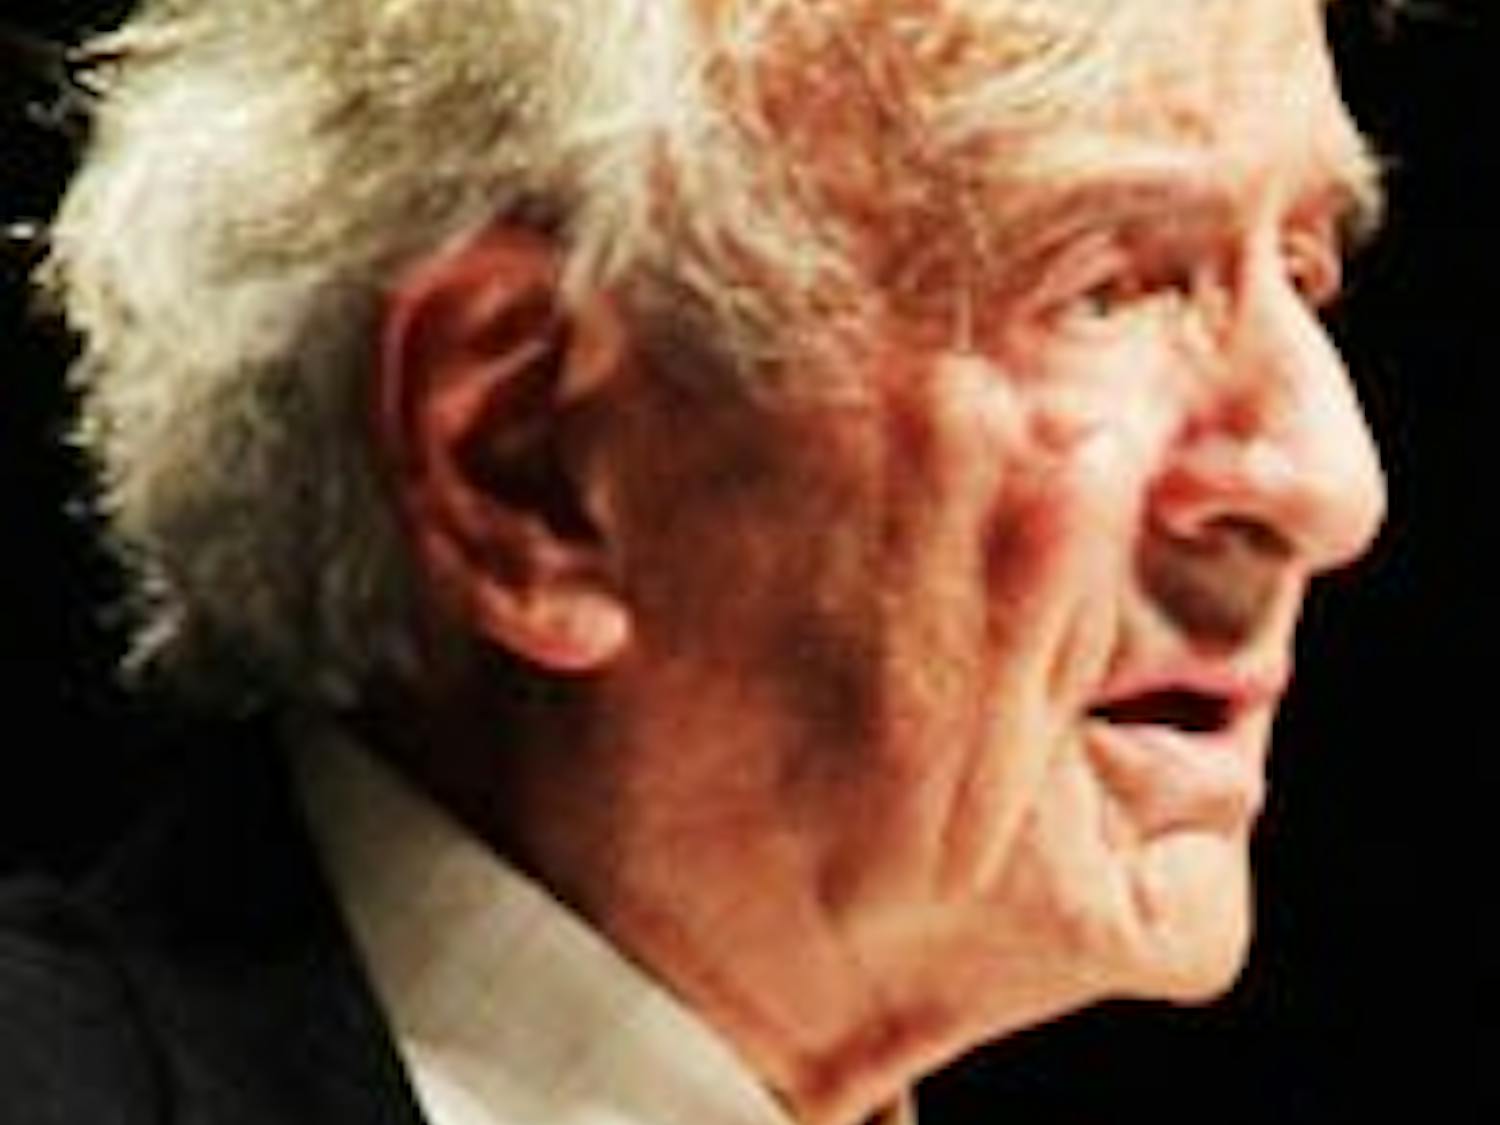 Elie Wiesel gives a speech entitled "Against Indifference" at the Memorial Hall on October 10. Addressing the ever-present access to information in this modern age, he said, "Information alone is not enough. Information must be translated into knowledge; knowledge, into sensitivity; sensitivity, into commitment."